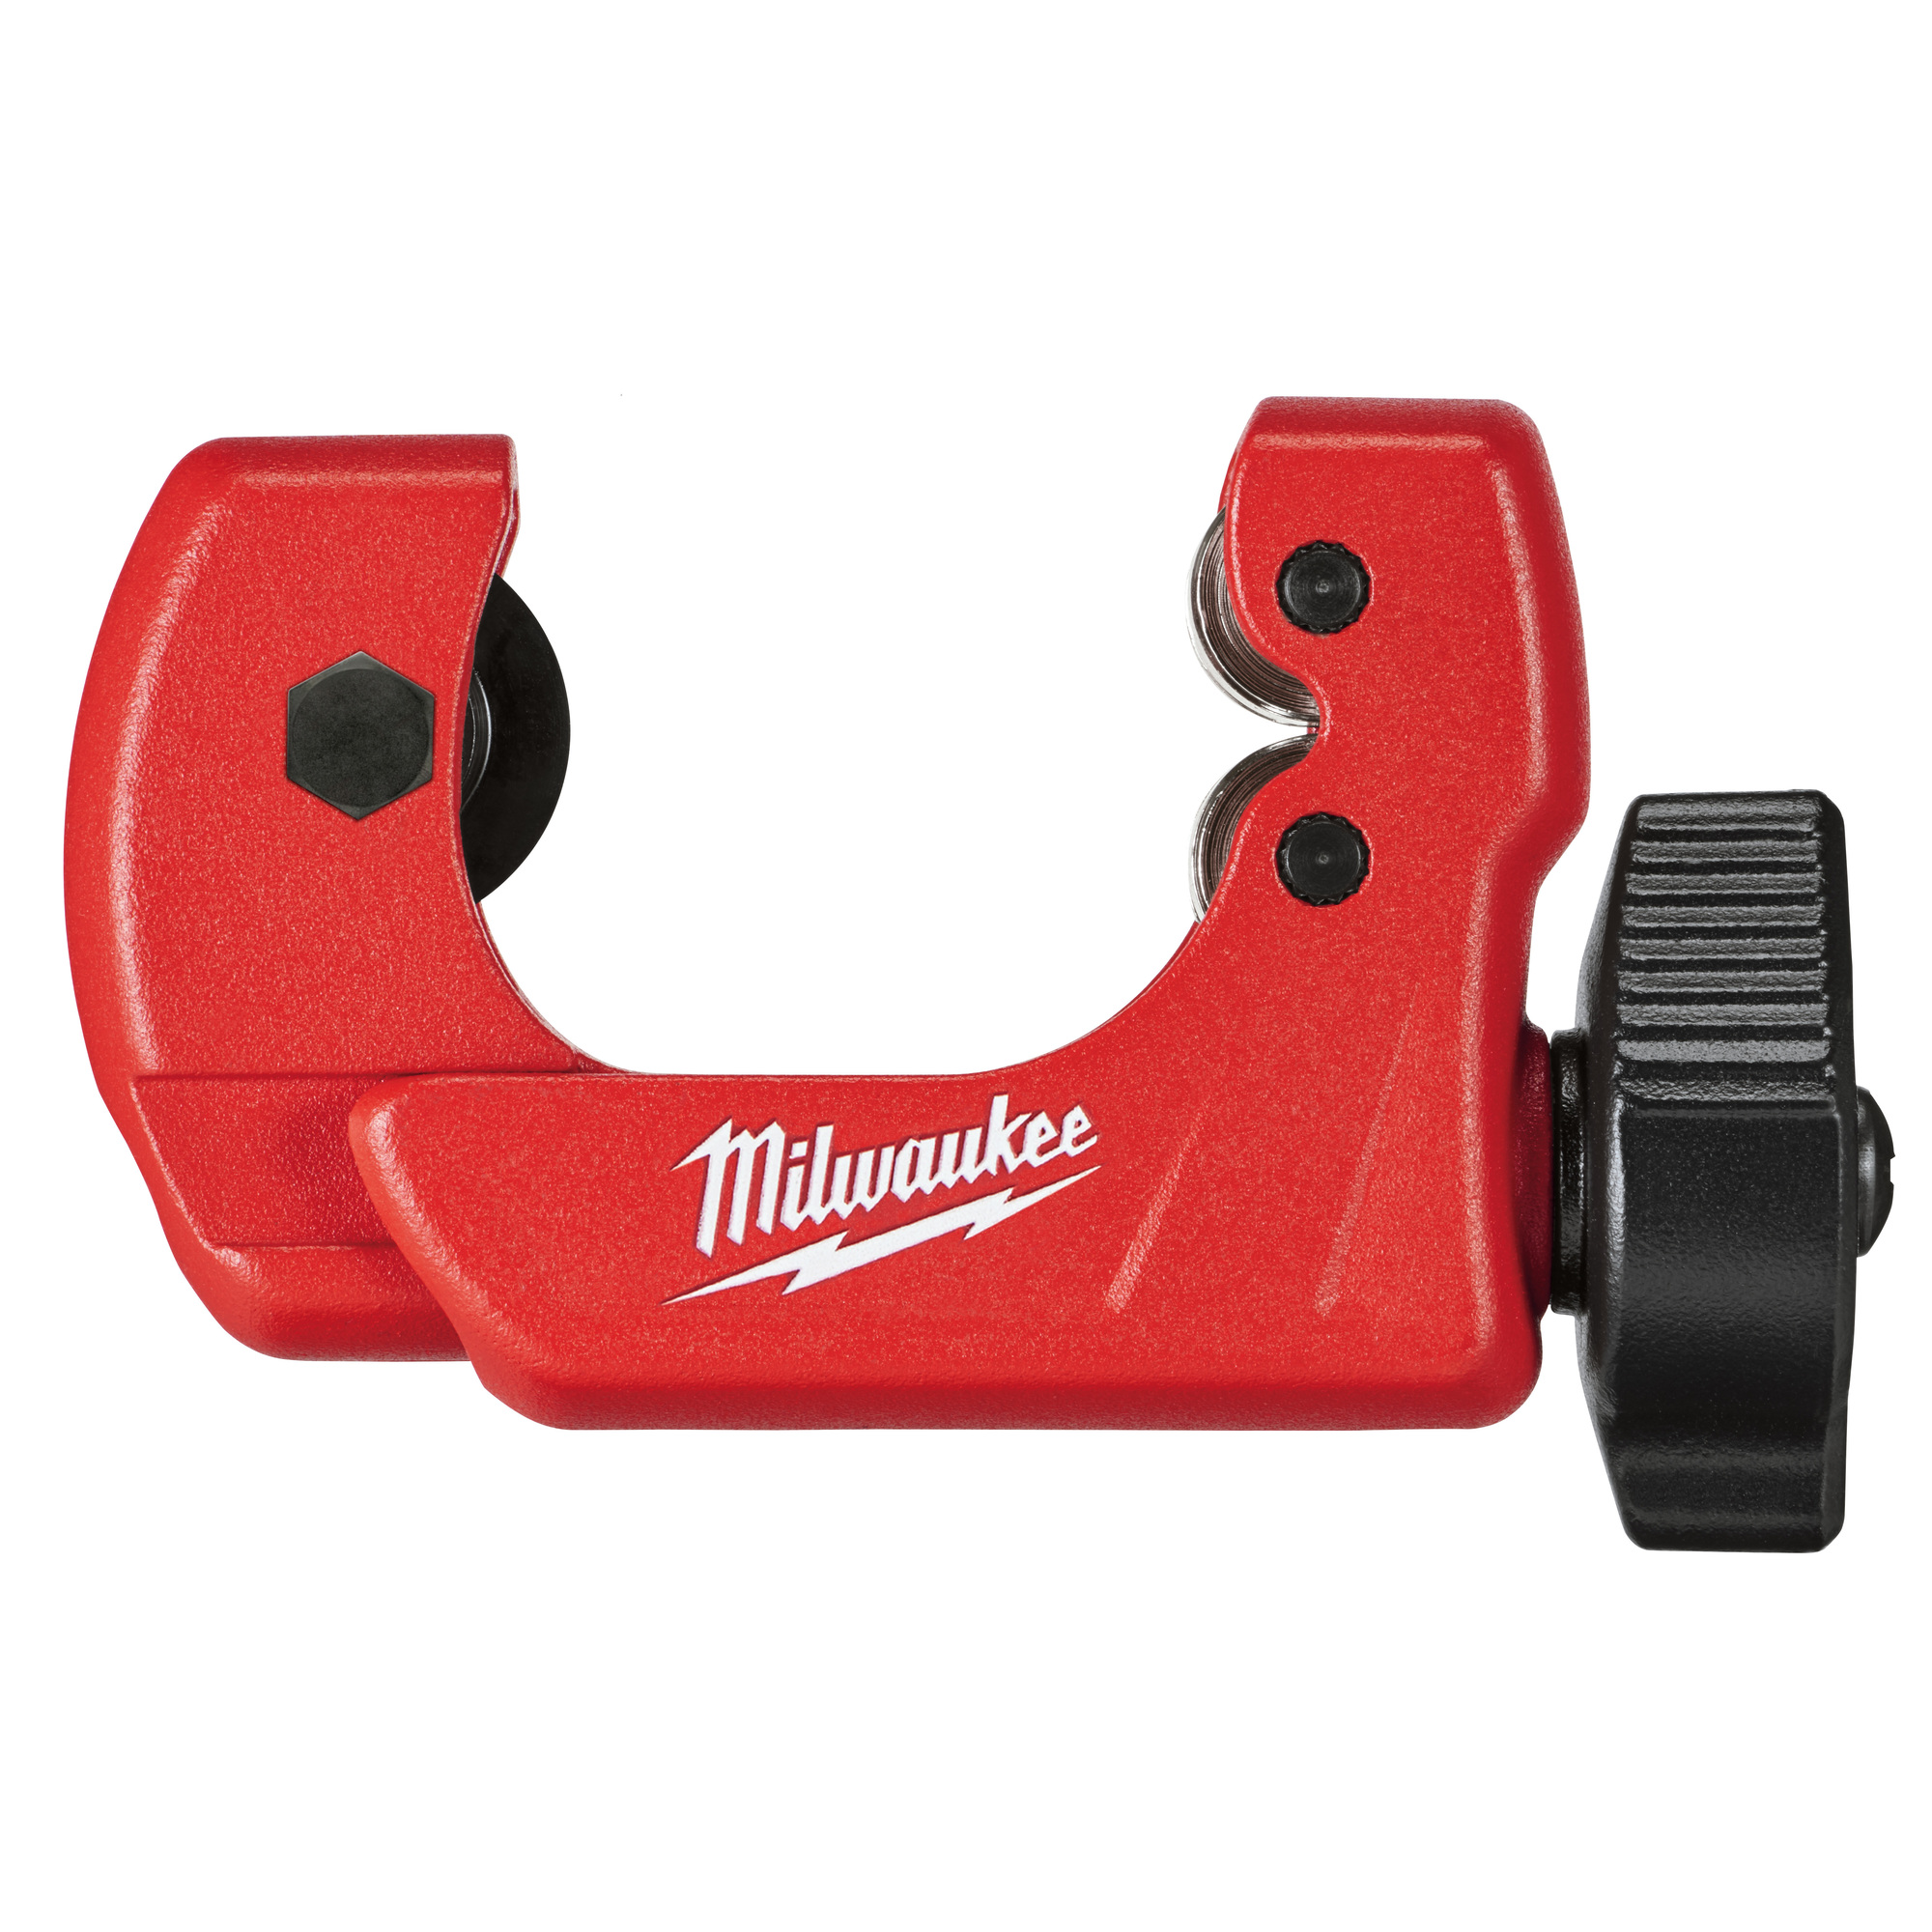 Milwaukee, 1Inch Mini Copper Tubing Cutter, Max. Diameter 1.13 in, Blade Material Carbon Steel, Length 5.85 in, Model 48-22-4251